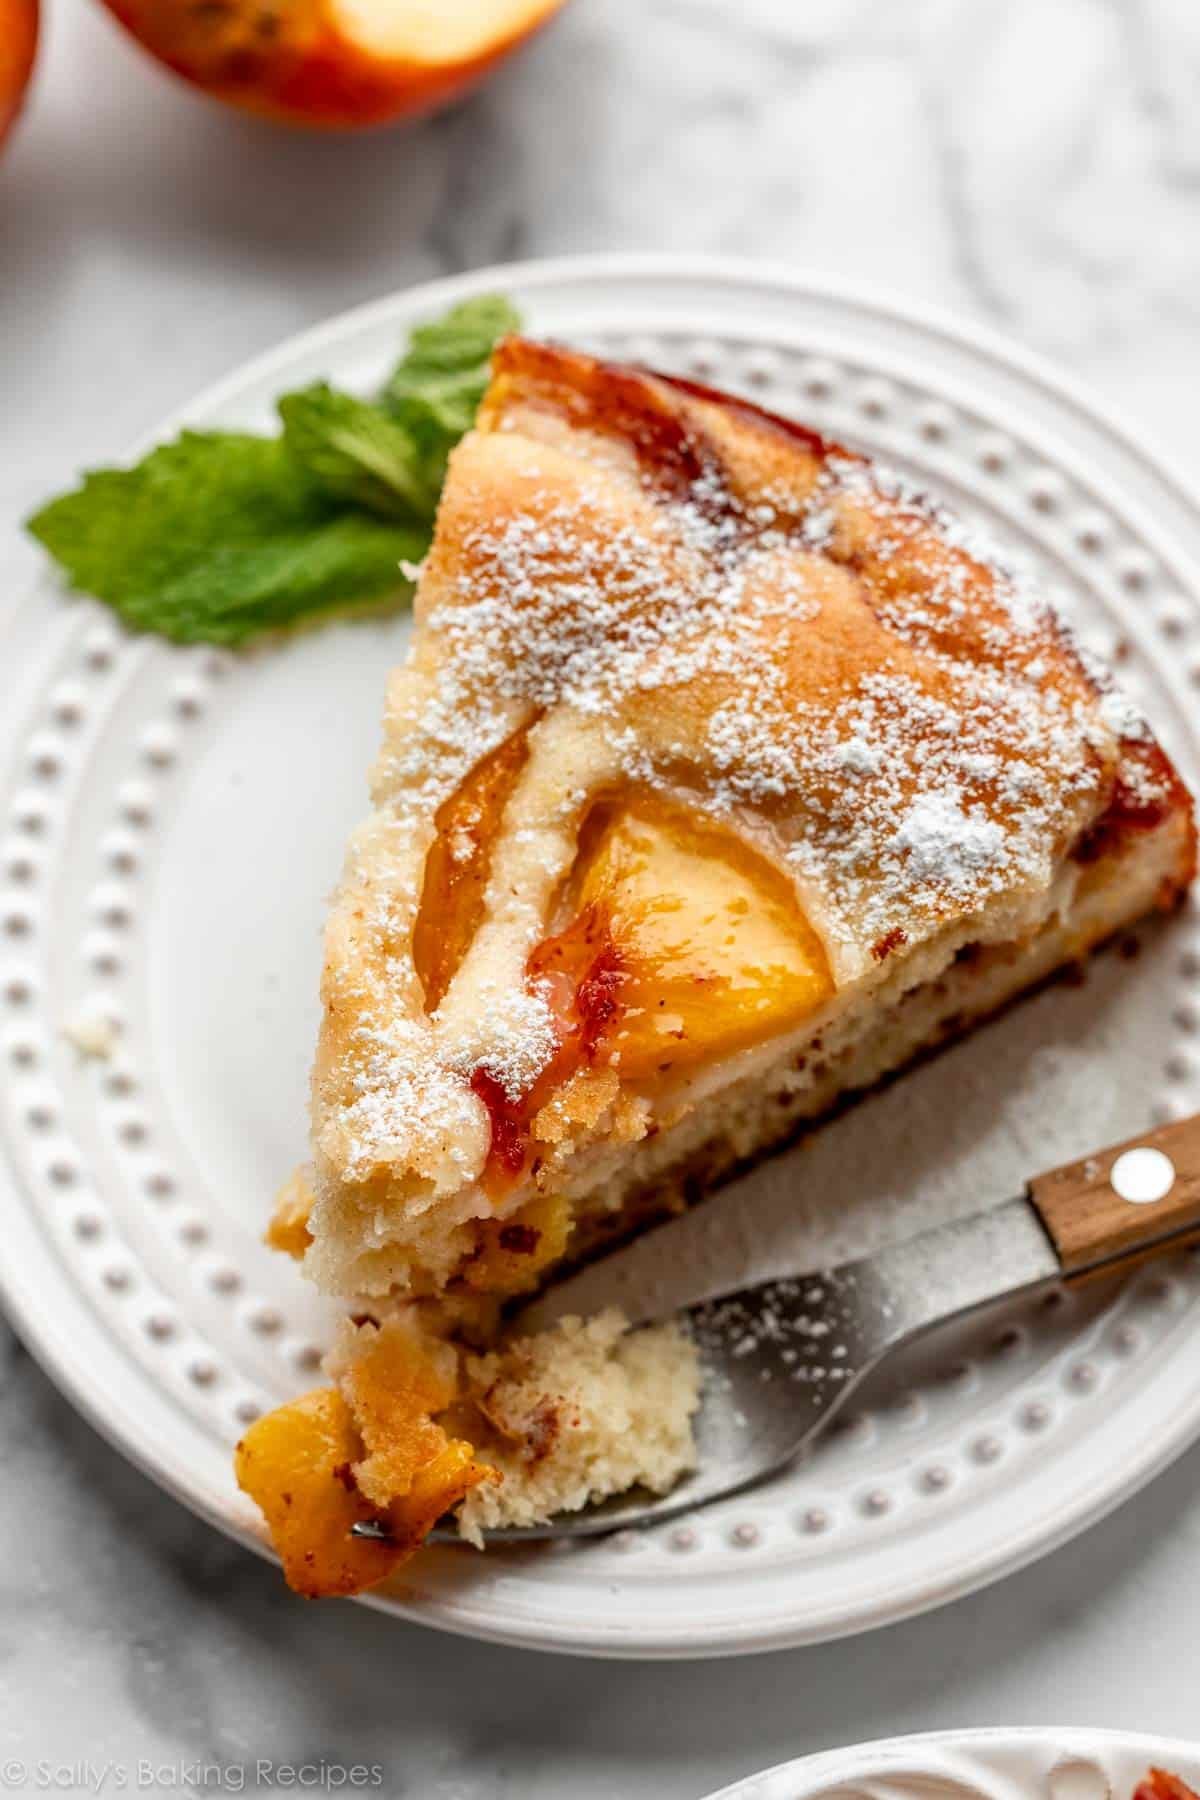 slice of fresh peach cake with confectioners' sugar on top on white plate.